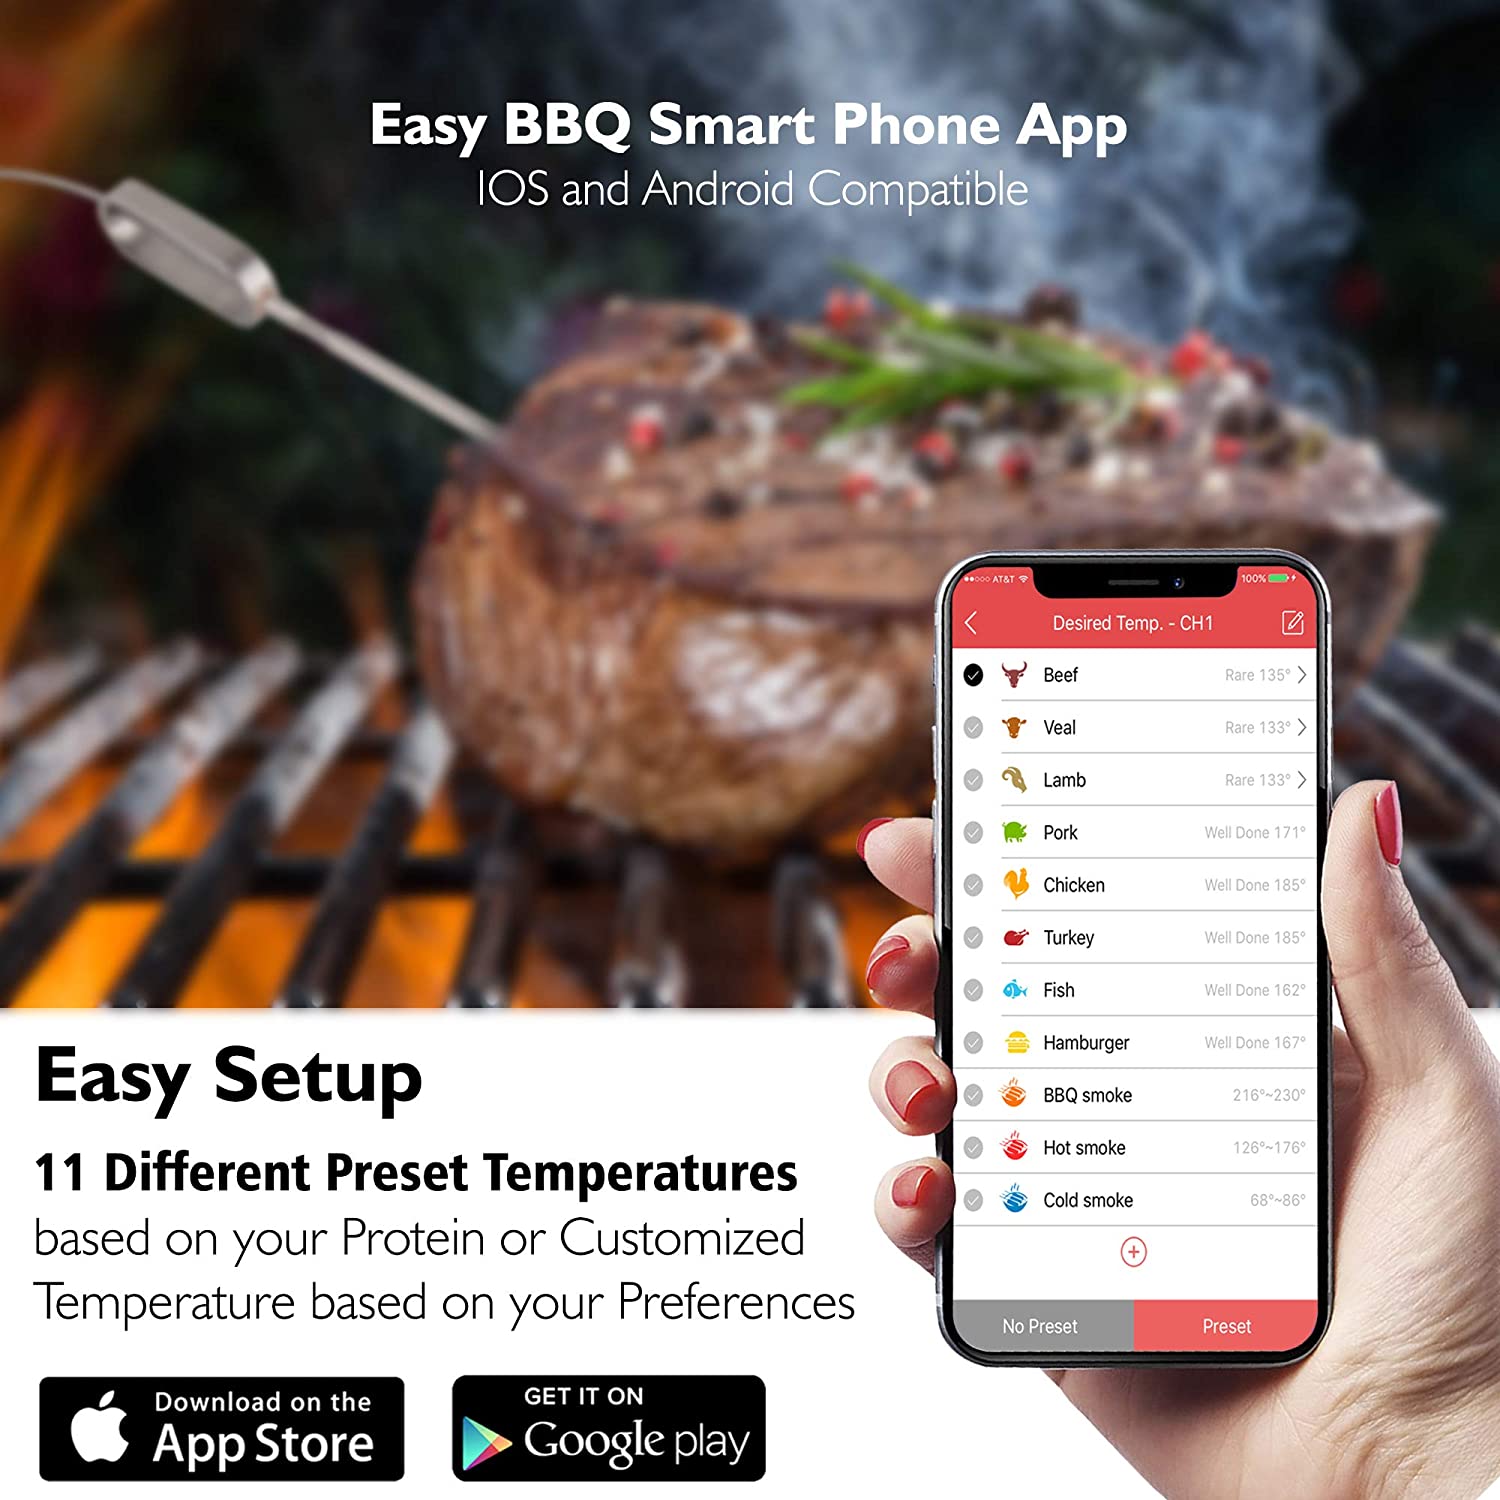 SuperFast Wireless Outdoor Remote Digital BBQ Thermometer